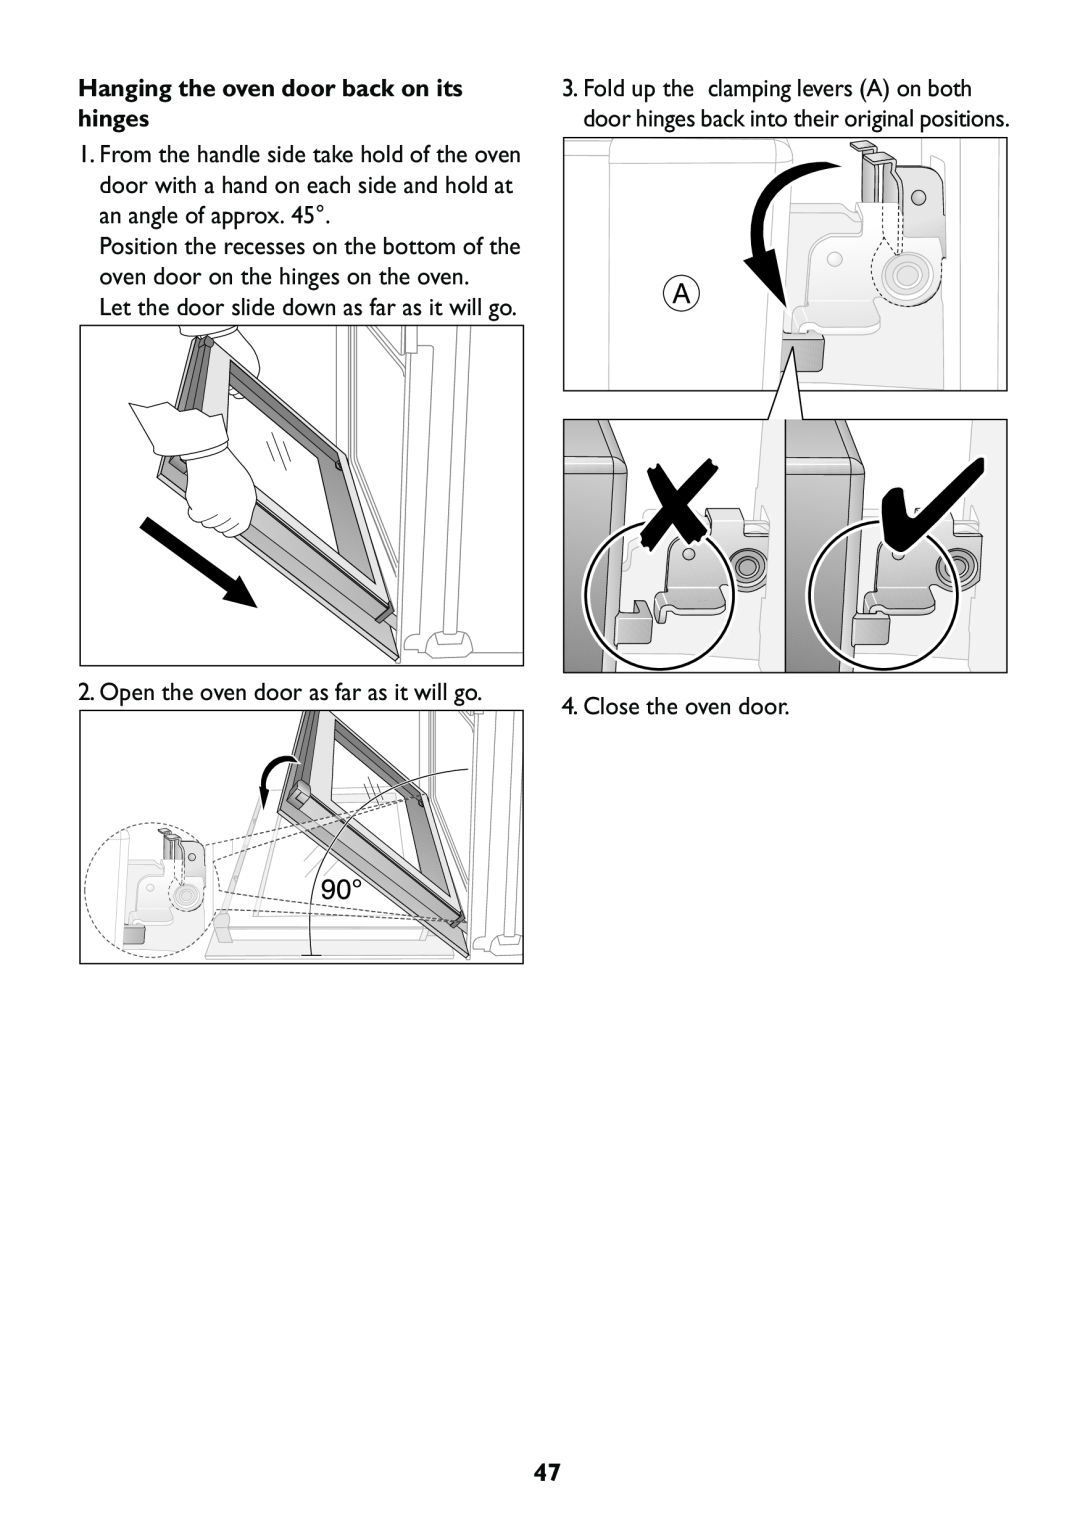 John Lewis JLBIOS609 manual Hanging the oven door back on its hinges, Open the oven door as far as it will go 